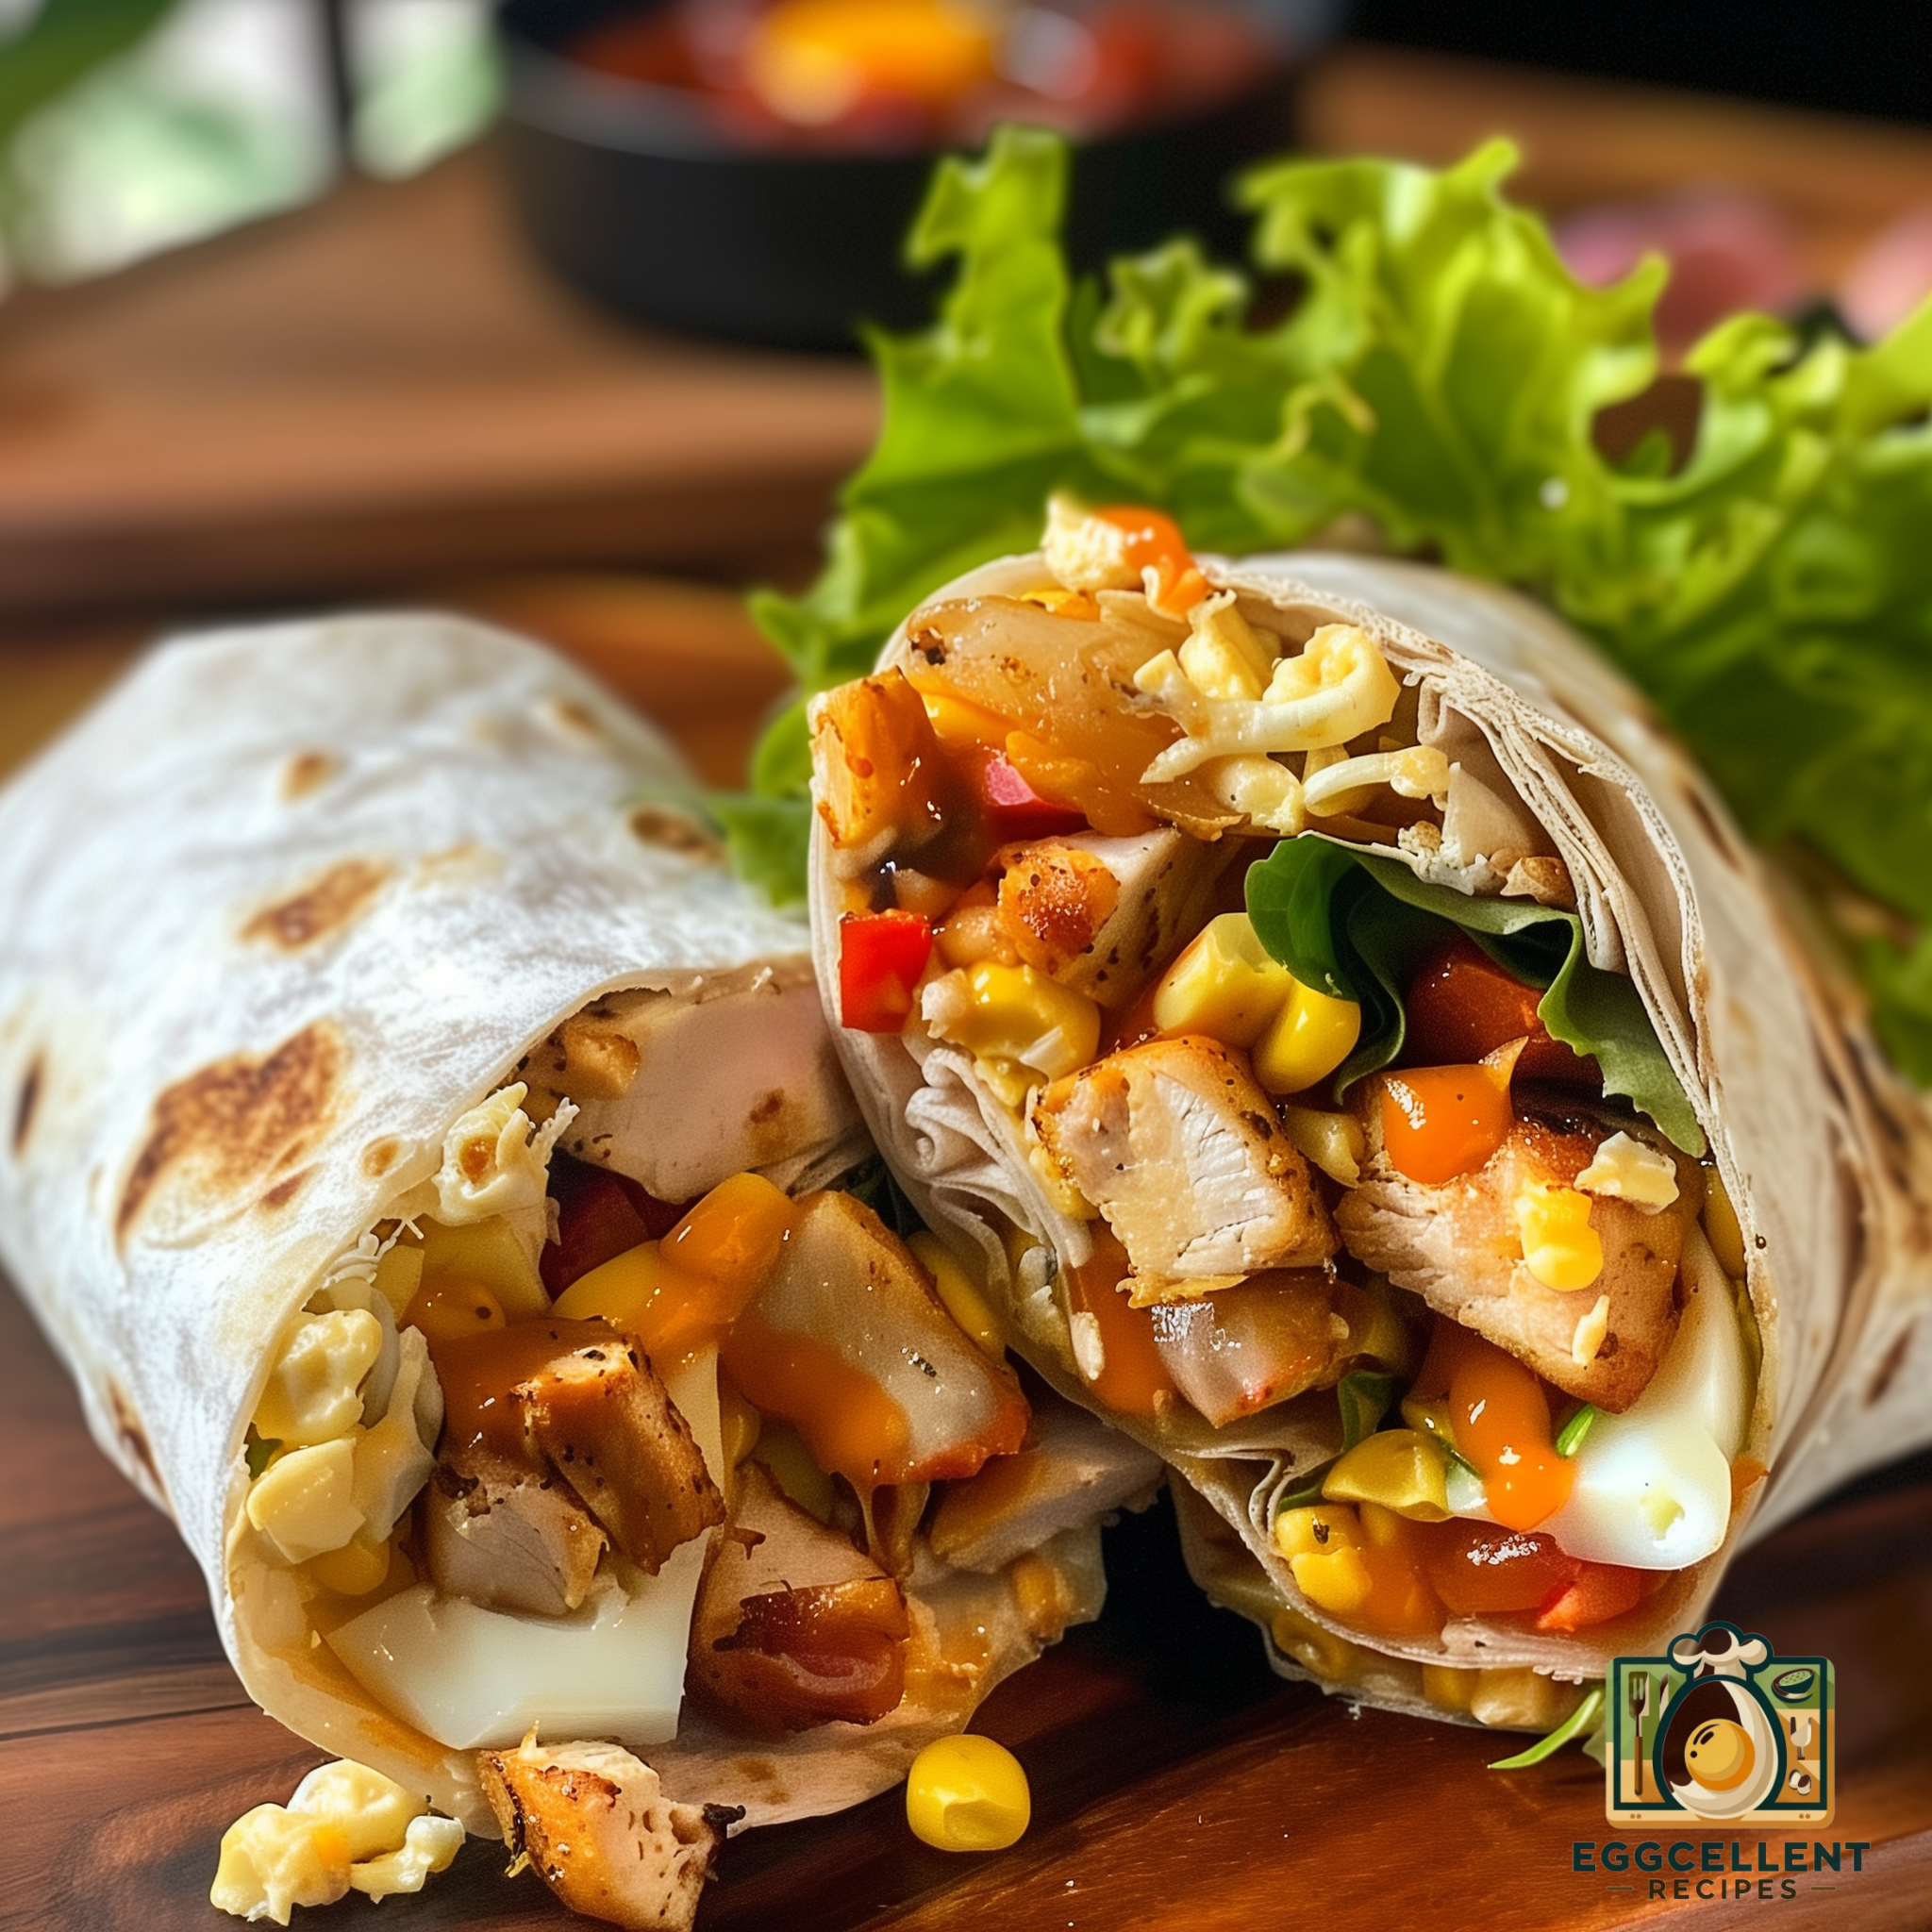 BBQ Chicken and Egg Wrap Recipe